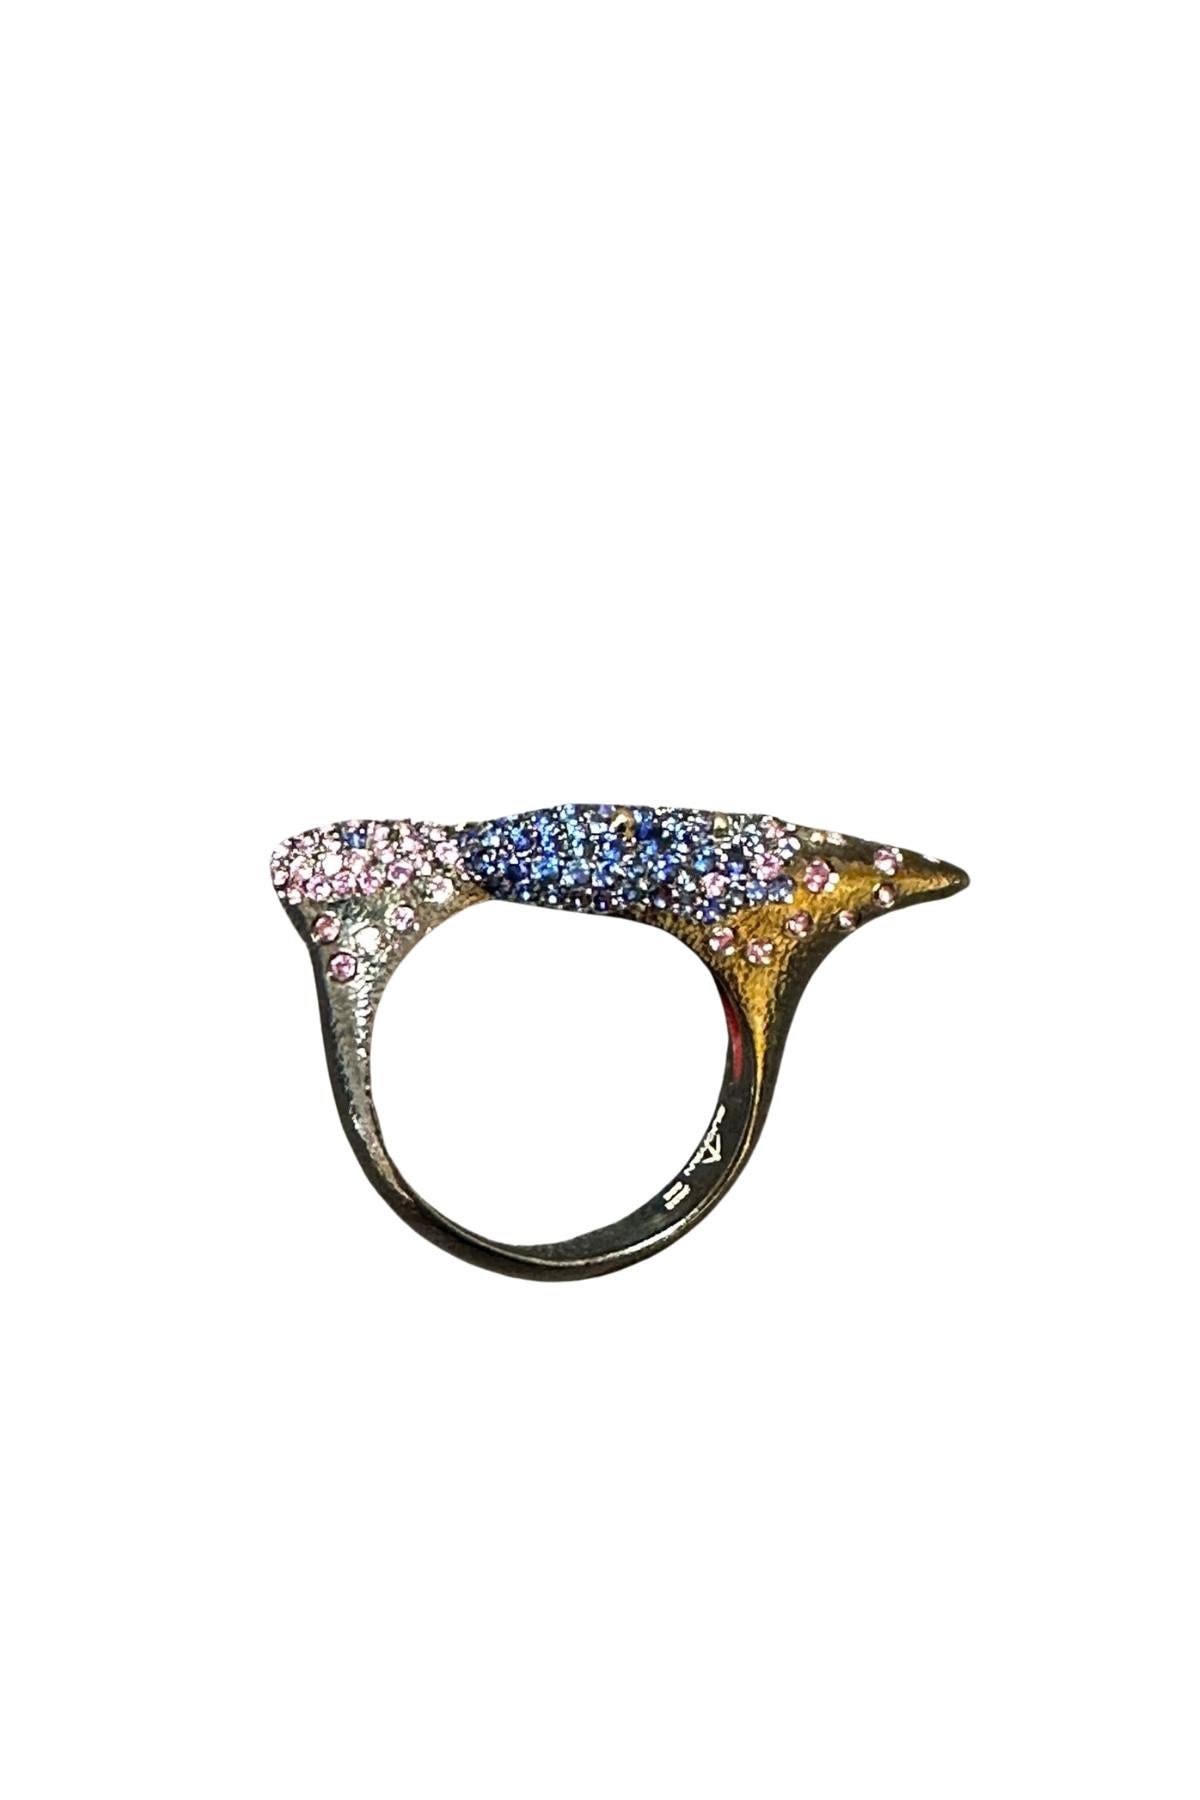 Contemporary Arman  Suciyan  Blue Sapphire and  Rhodolite Silver and  Enamel Ring   For Sale